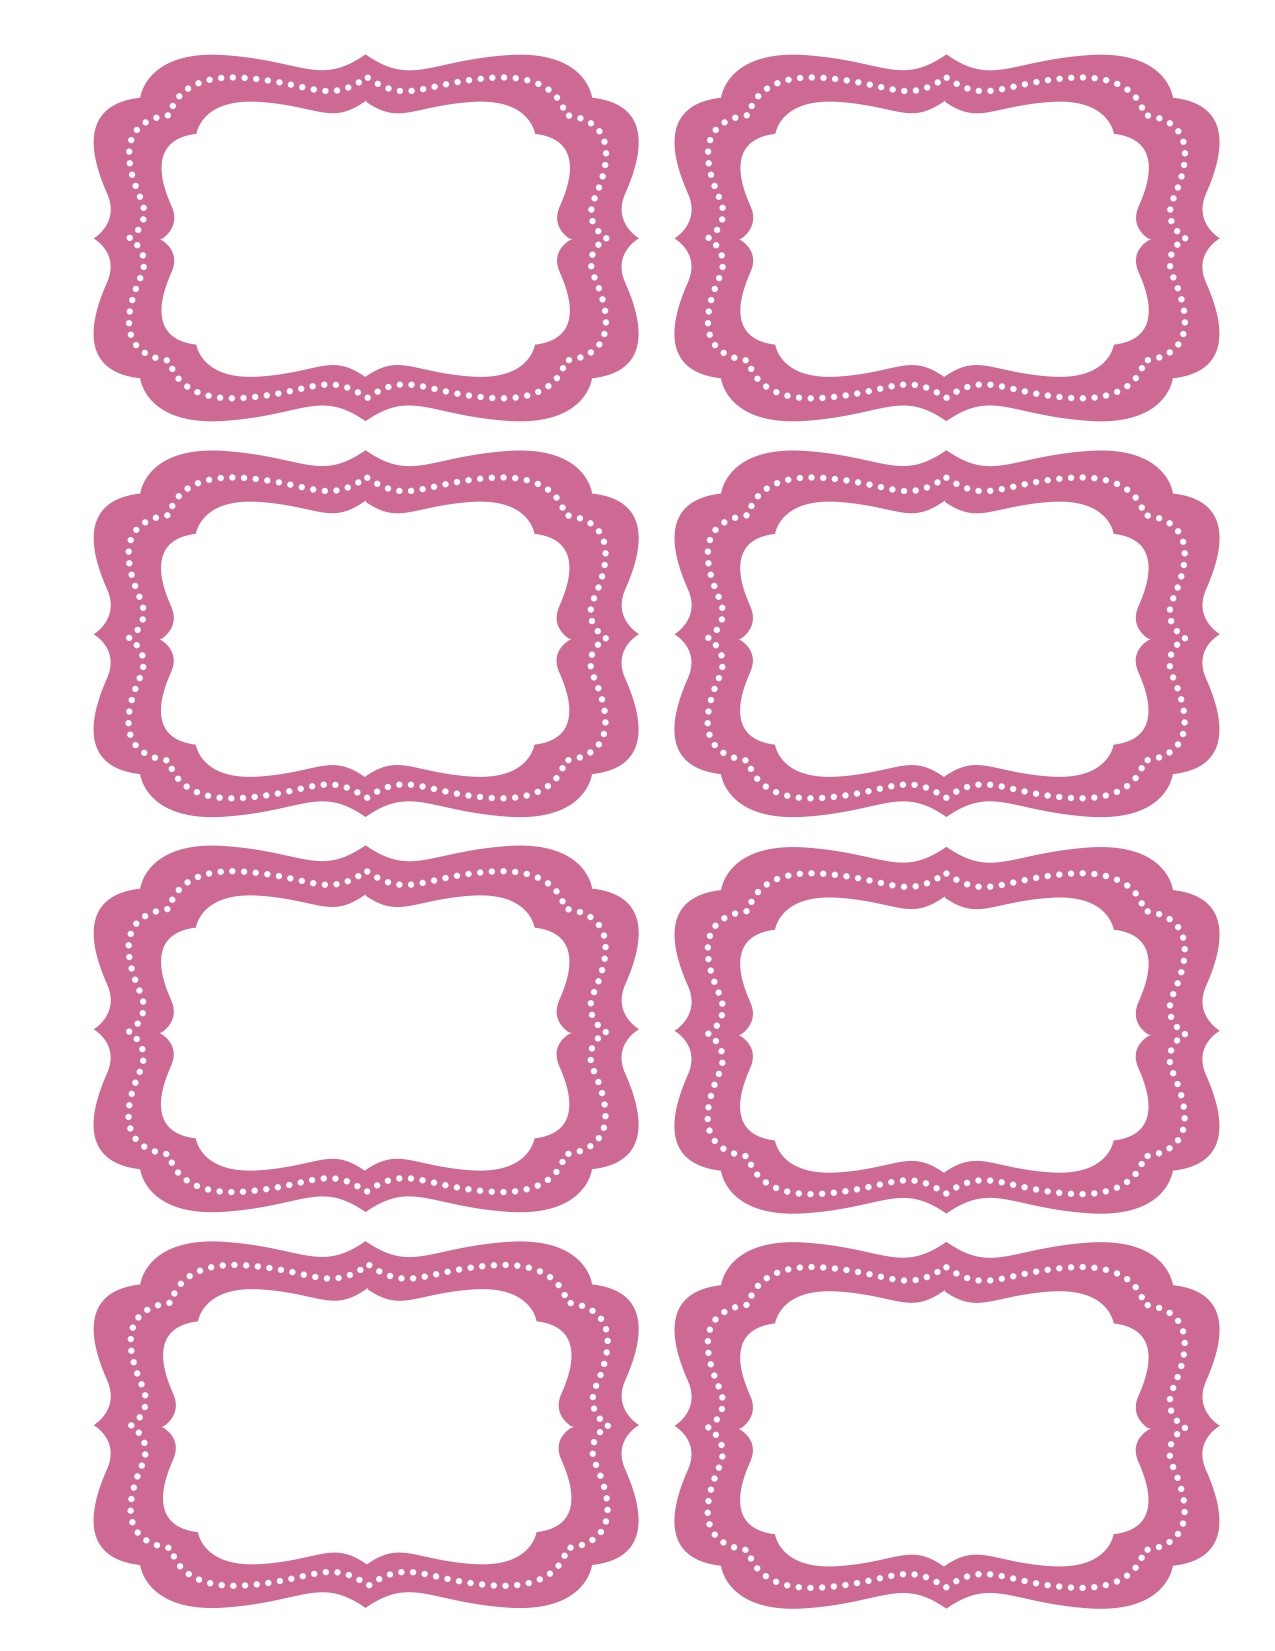 labels template free
 Candy Labels Blank | Free Images at Clker.com - vector ..